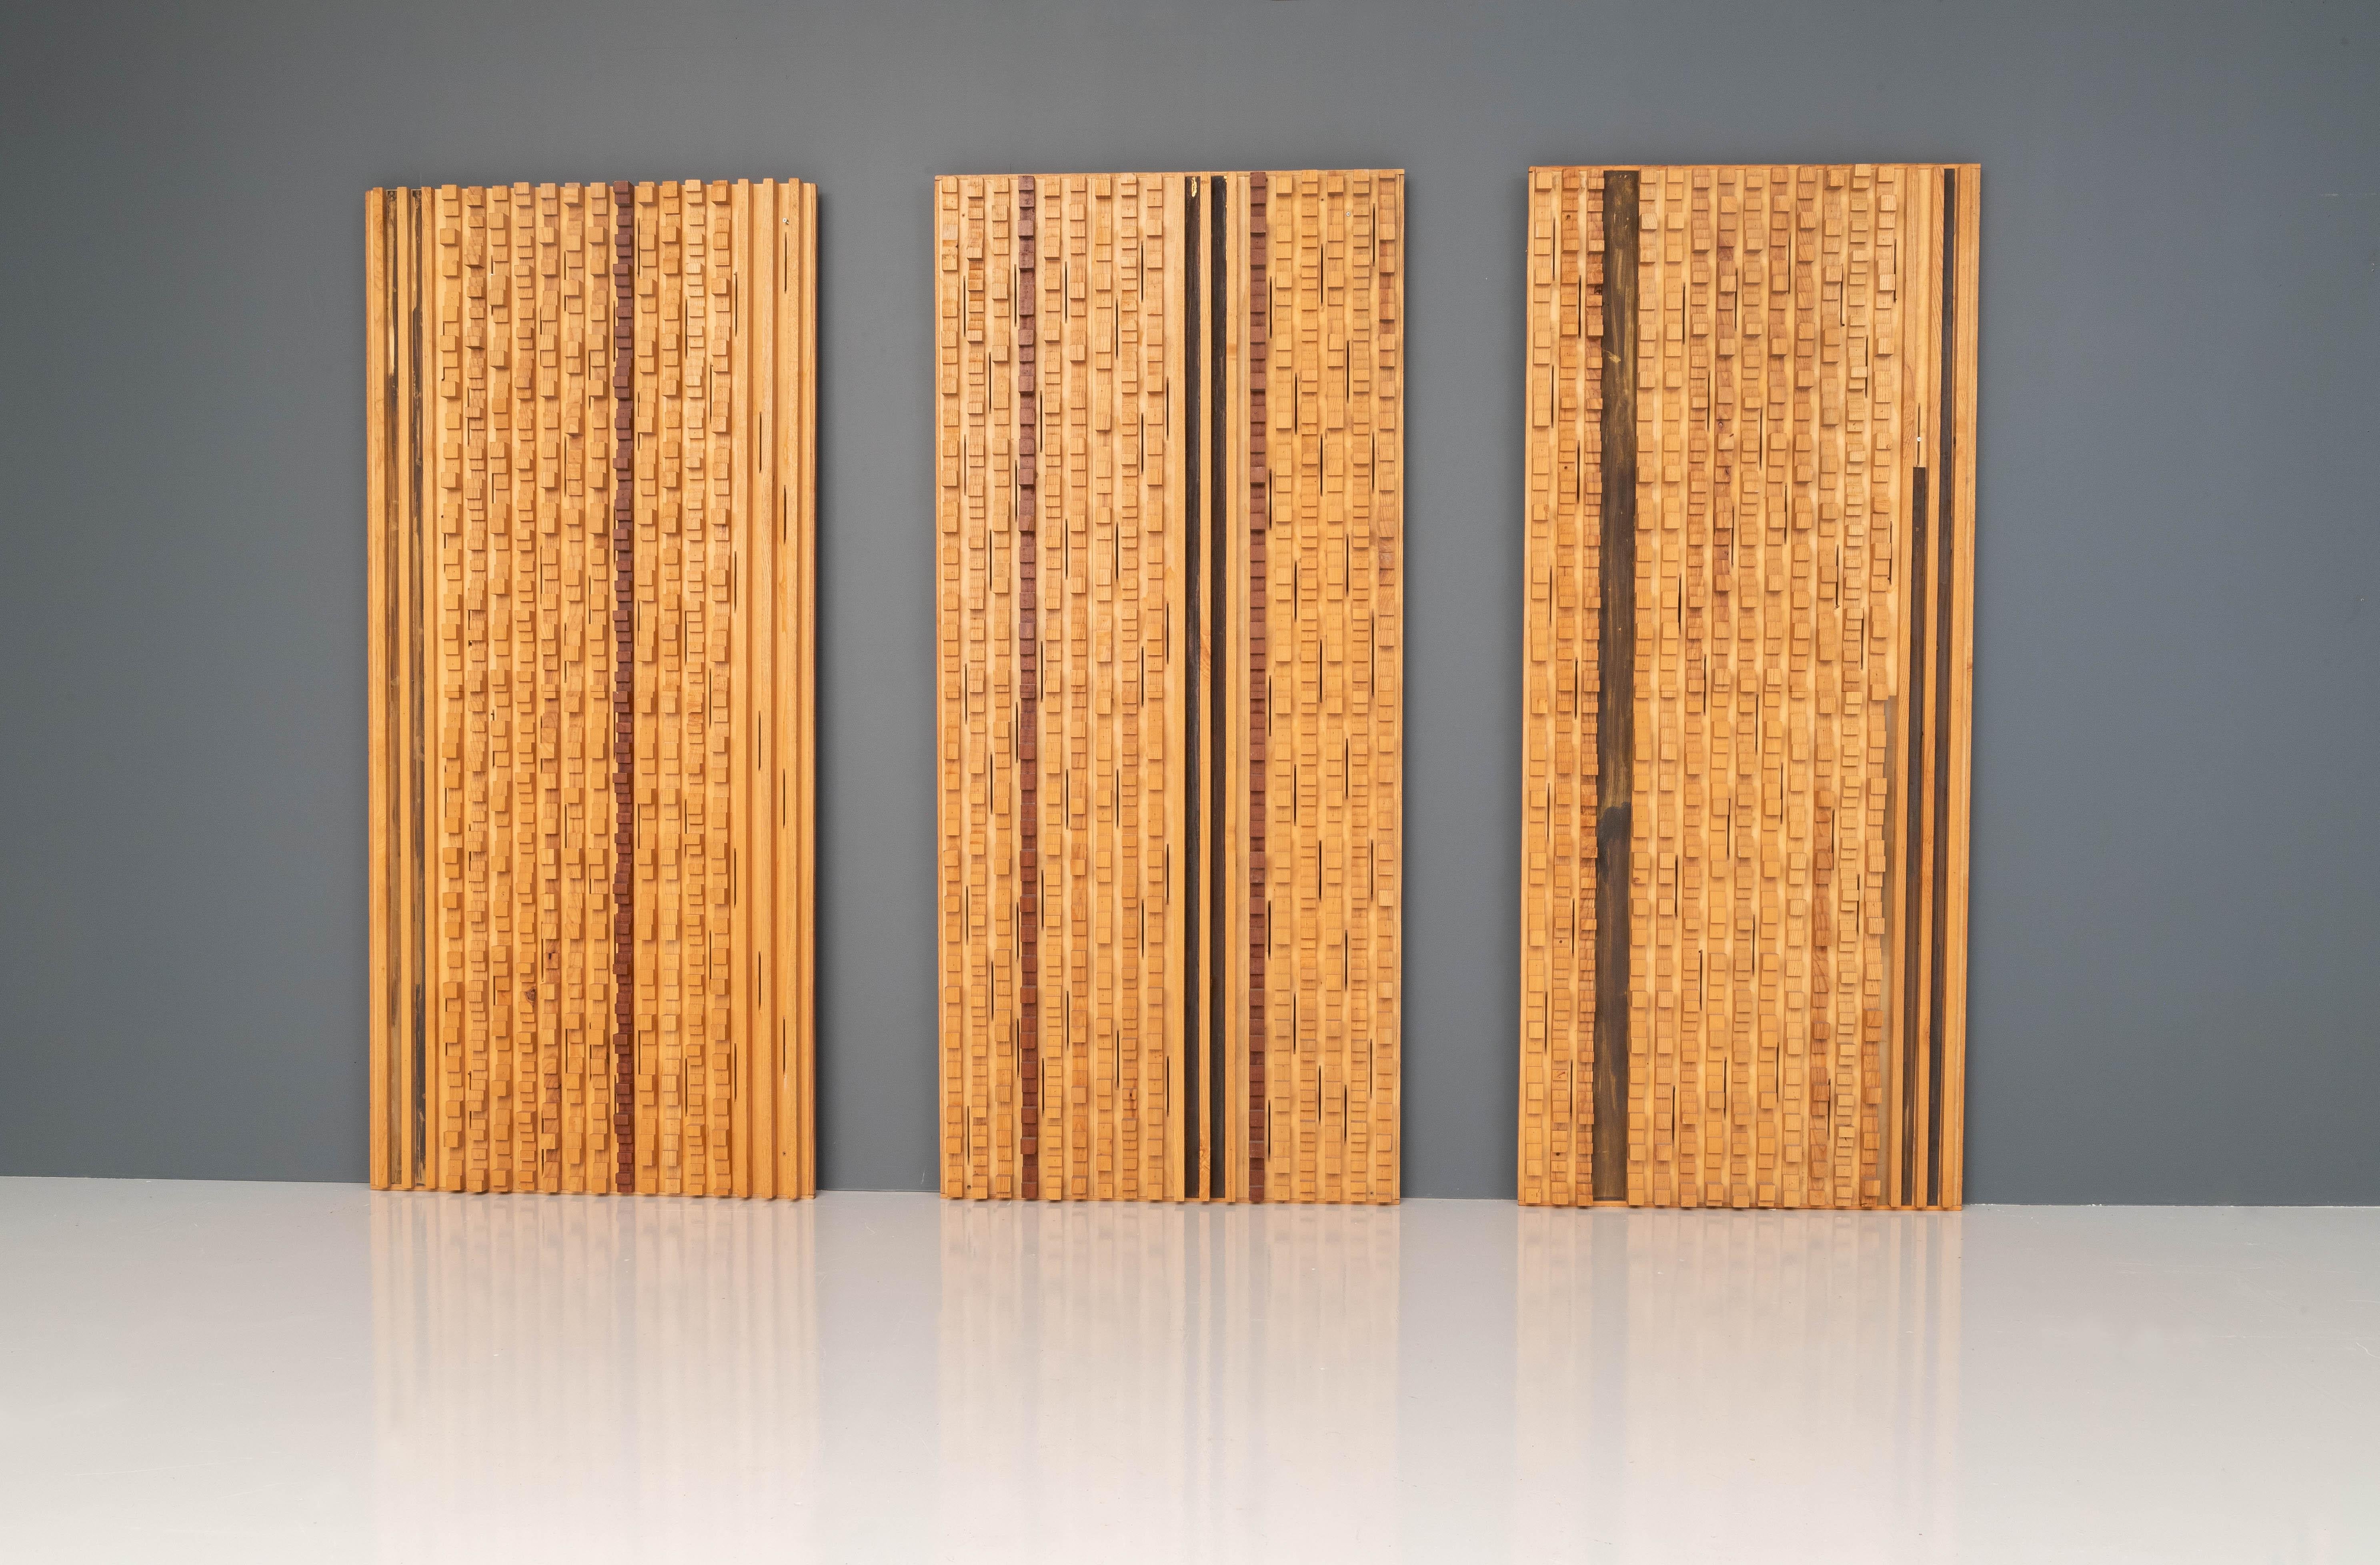 Set of 3 large wall panels by Italian sculptor Stefano d'Amico (varying in width from 86 to 92 cm.) in ash and brass designed and dated, 1974.

There is not so much known about D'Amico's work apart from that he held expositions in Milan and Genova